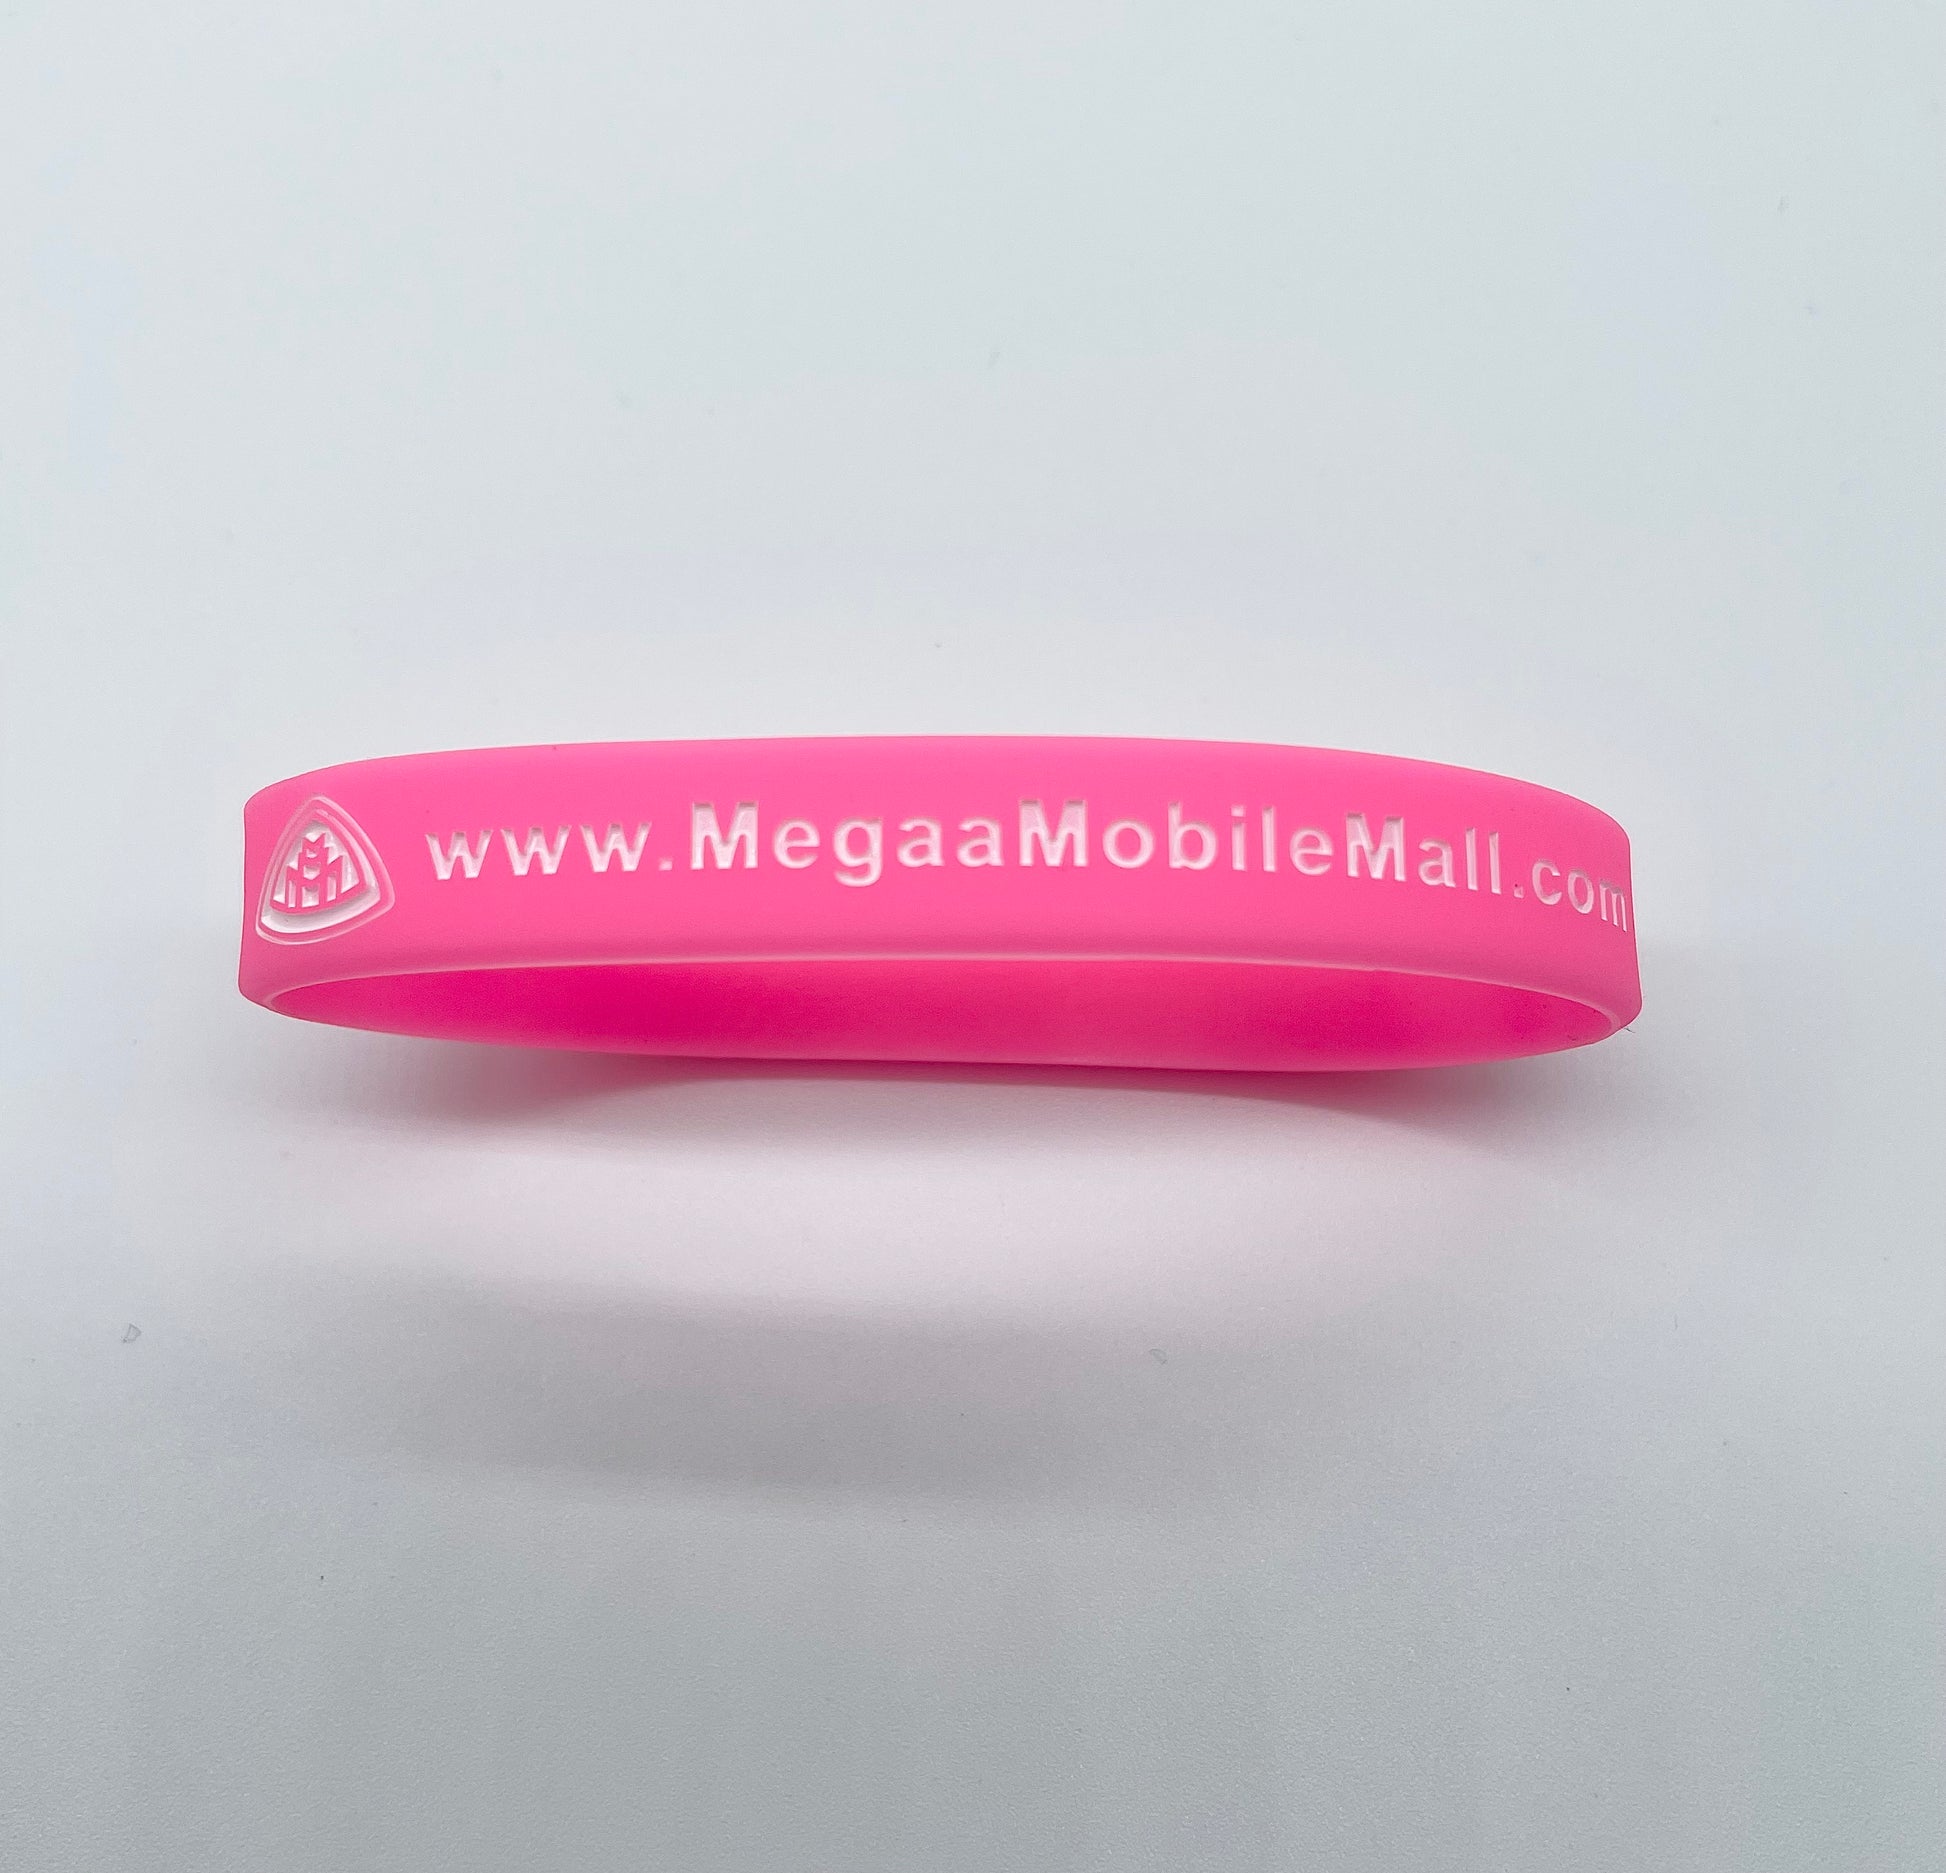 megaamobilemall wrist bands available in pink